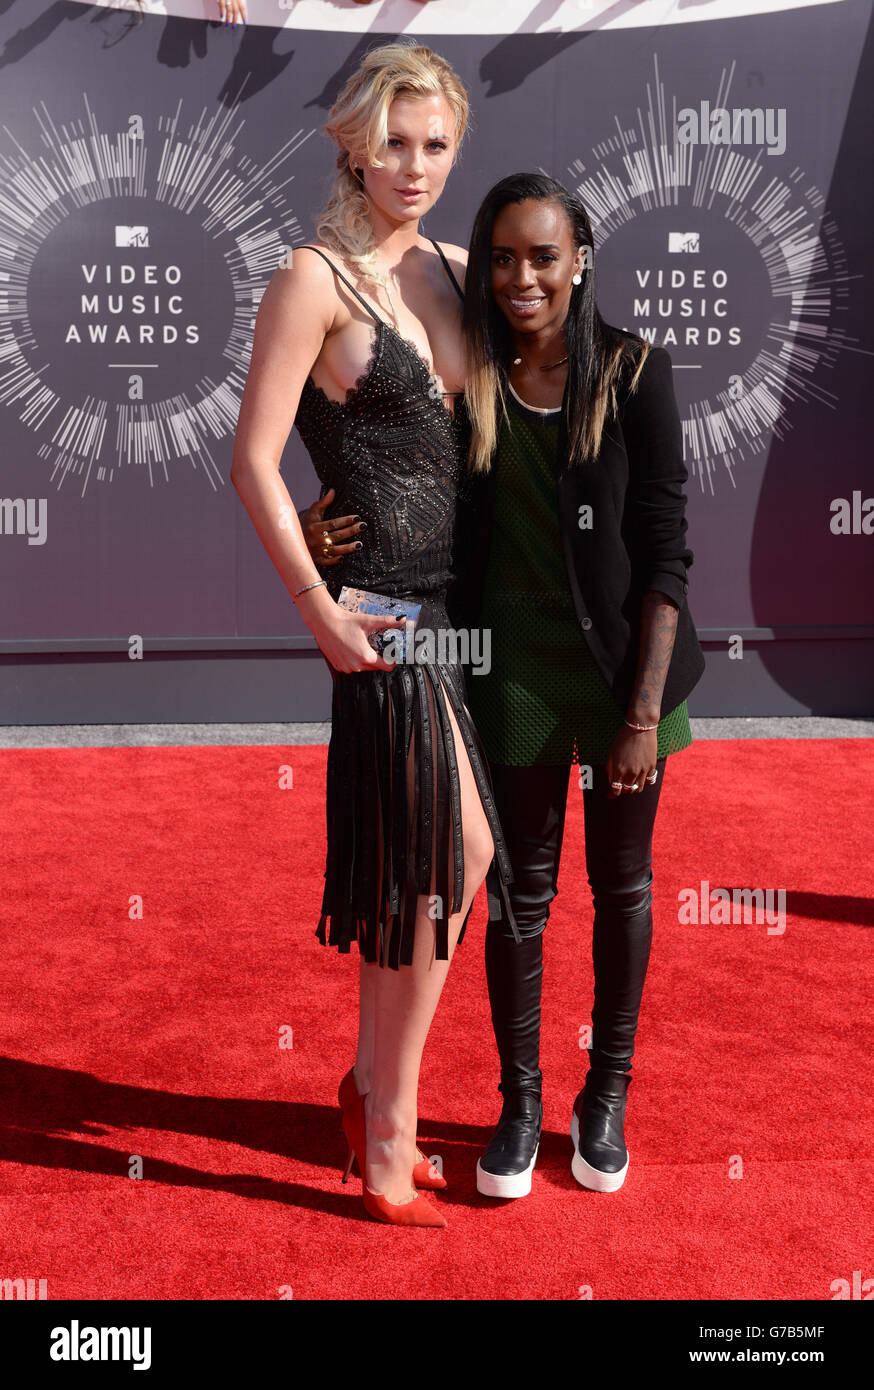 Ireland Baldwin and Angel Haze arriving at the MTV Video Music Awards 2014 at The Forum in Inglewood, Los Angeles. Stock Photo